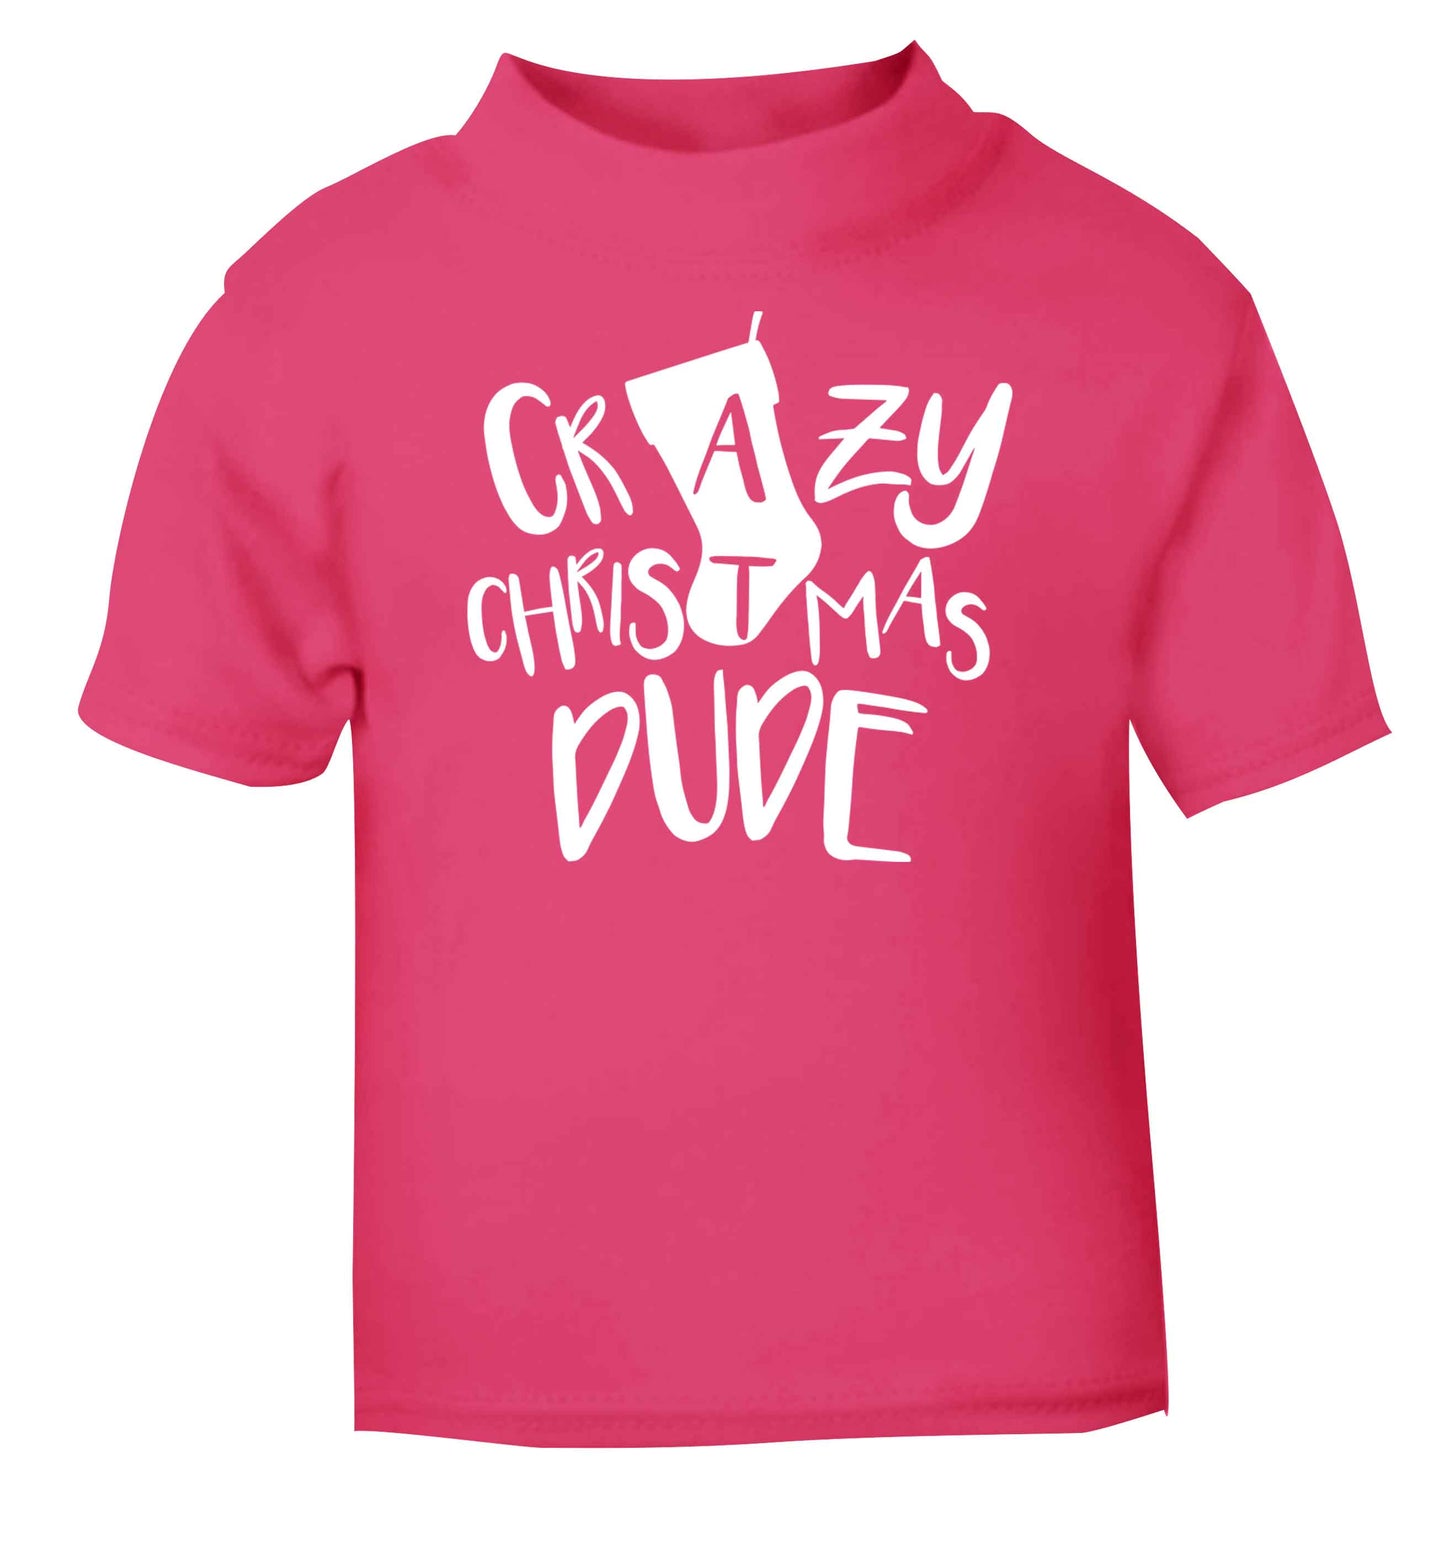 Crazy Christmas Dude pink baby toddler Tshirt 2 Years